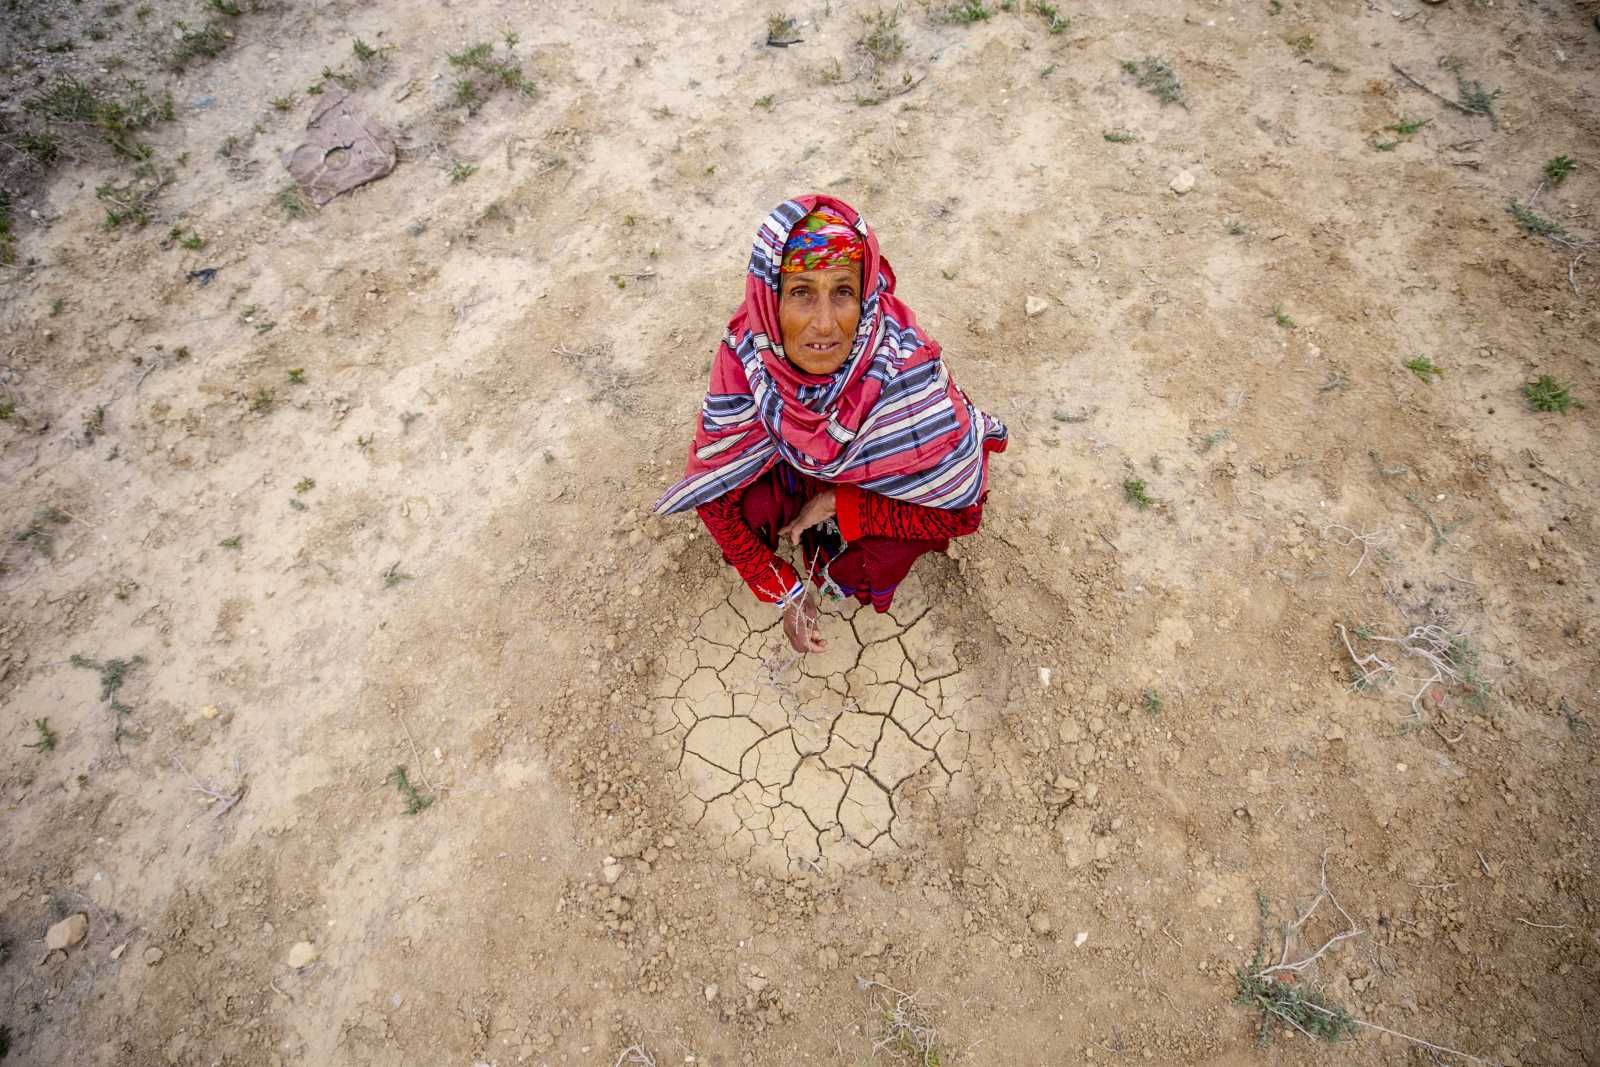 Social protection is essential in times of need: Tunisian farmer exposed to drought.